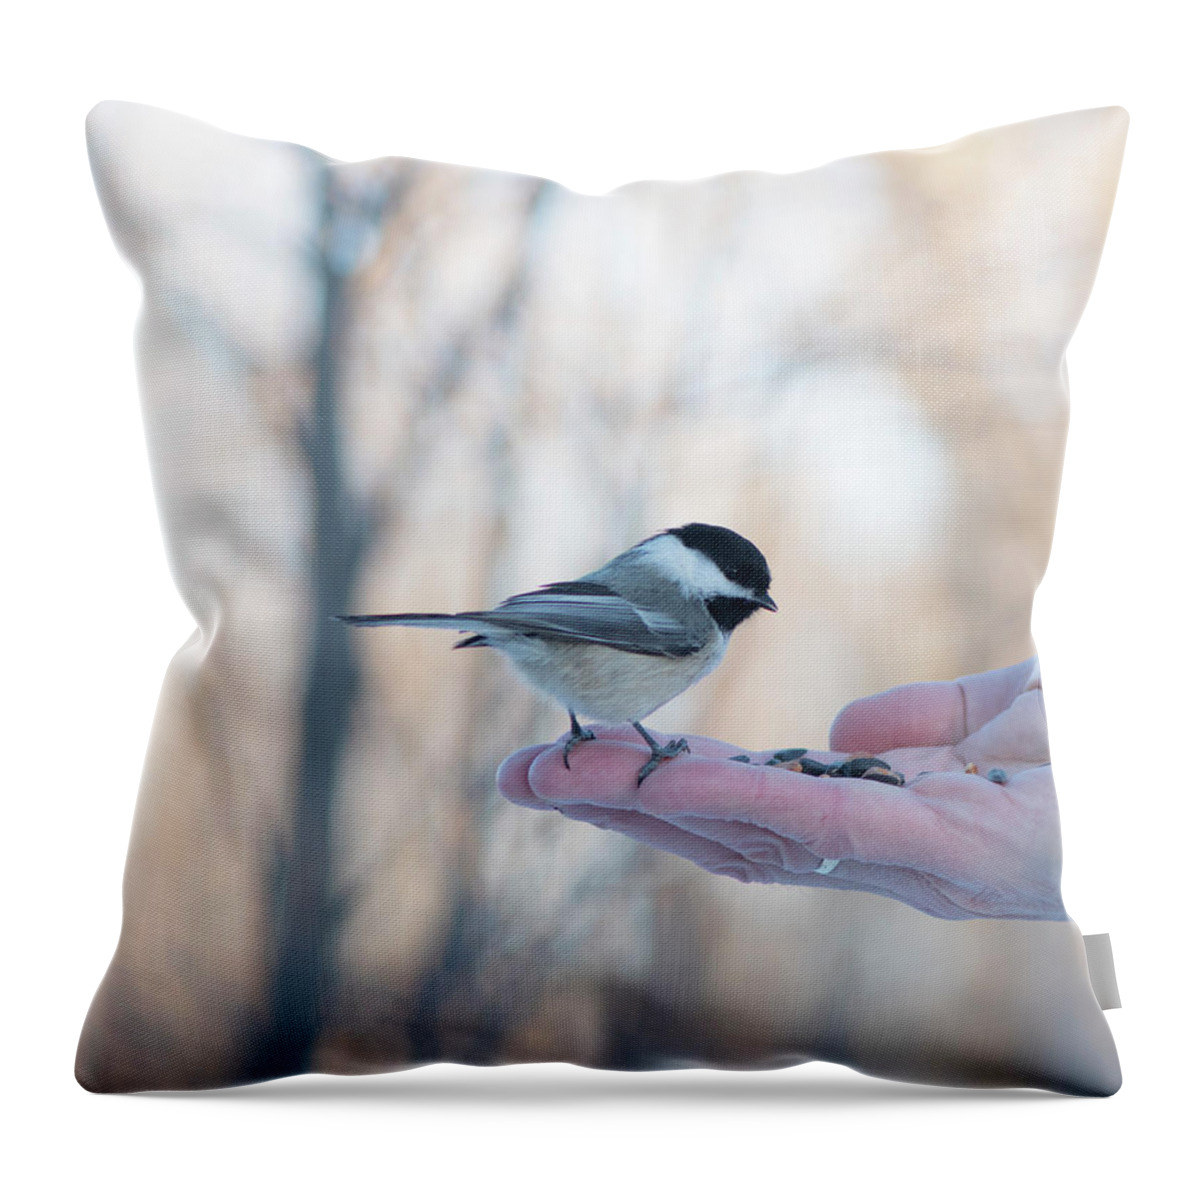 Chickadee Throw Pillow featuring the photograph Chickadee On Hand by Phil And Karen Rispin